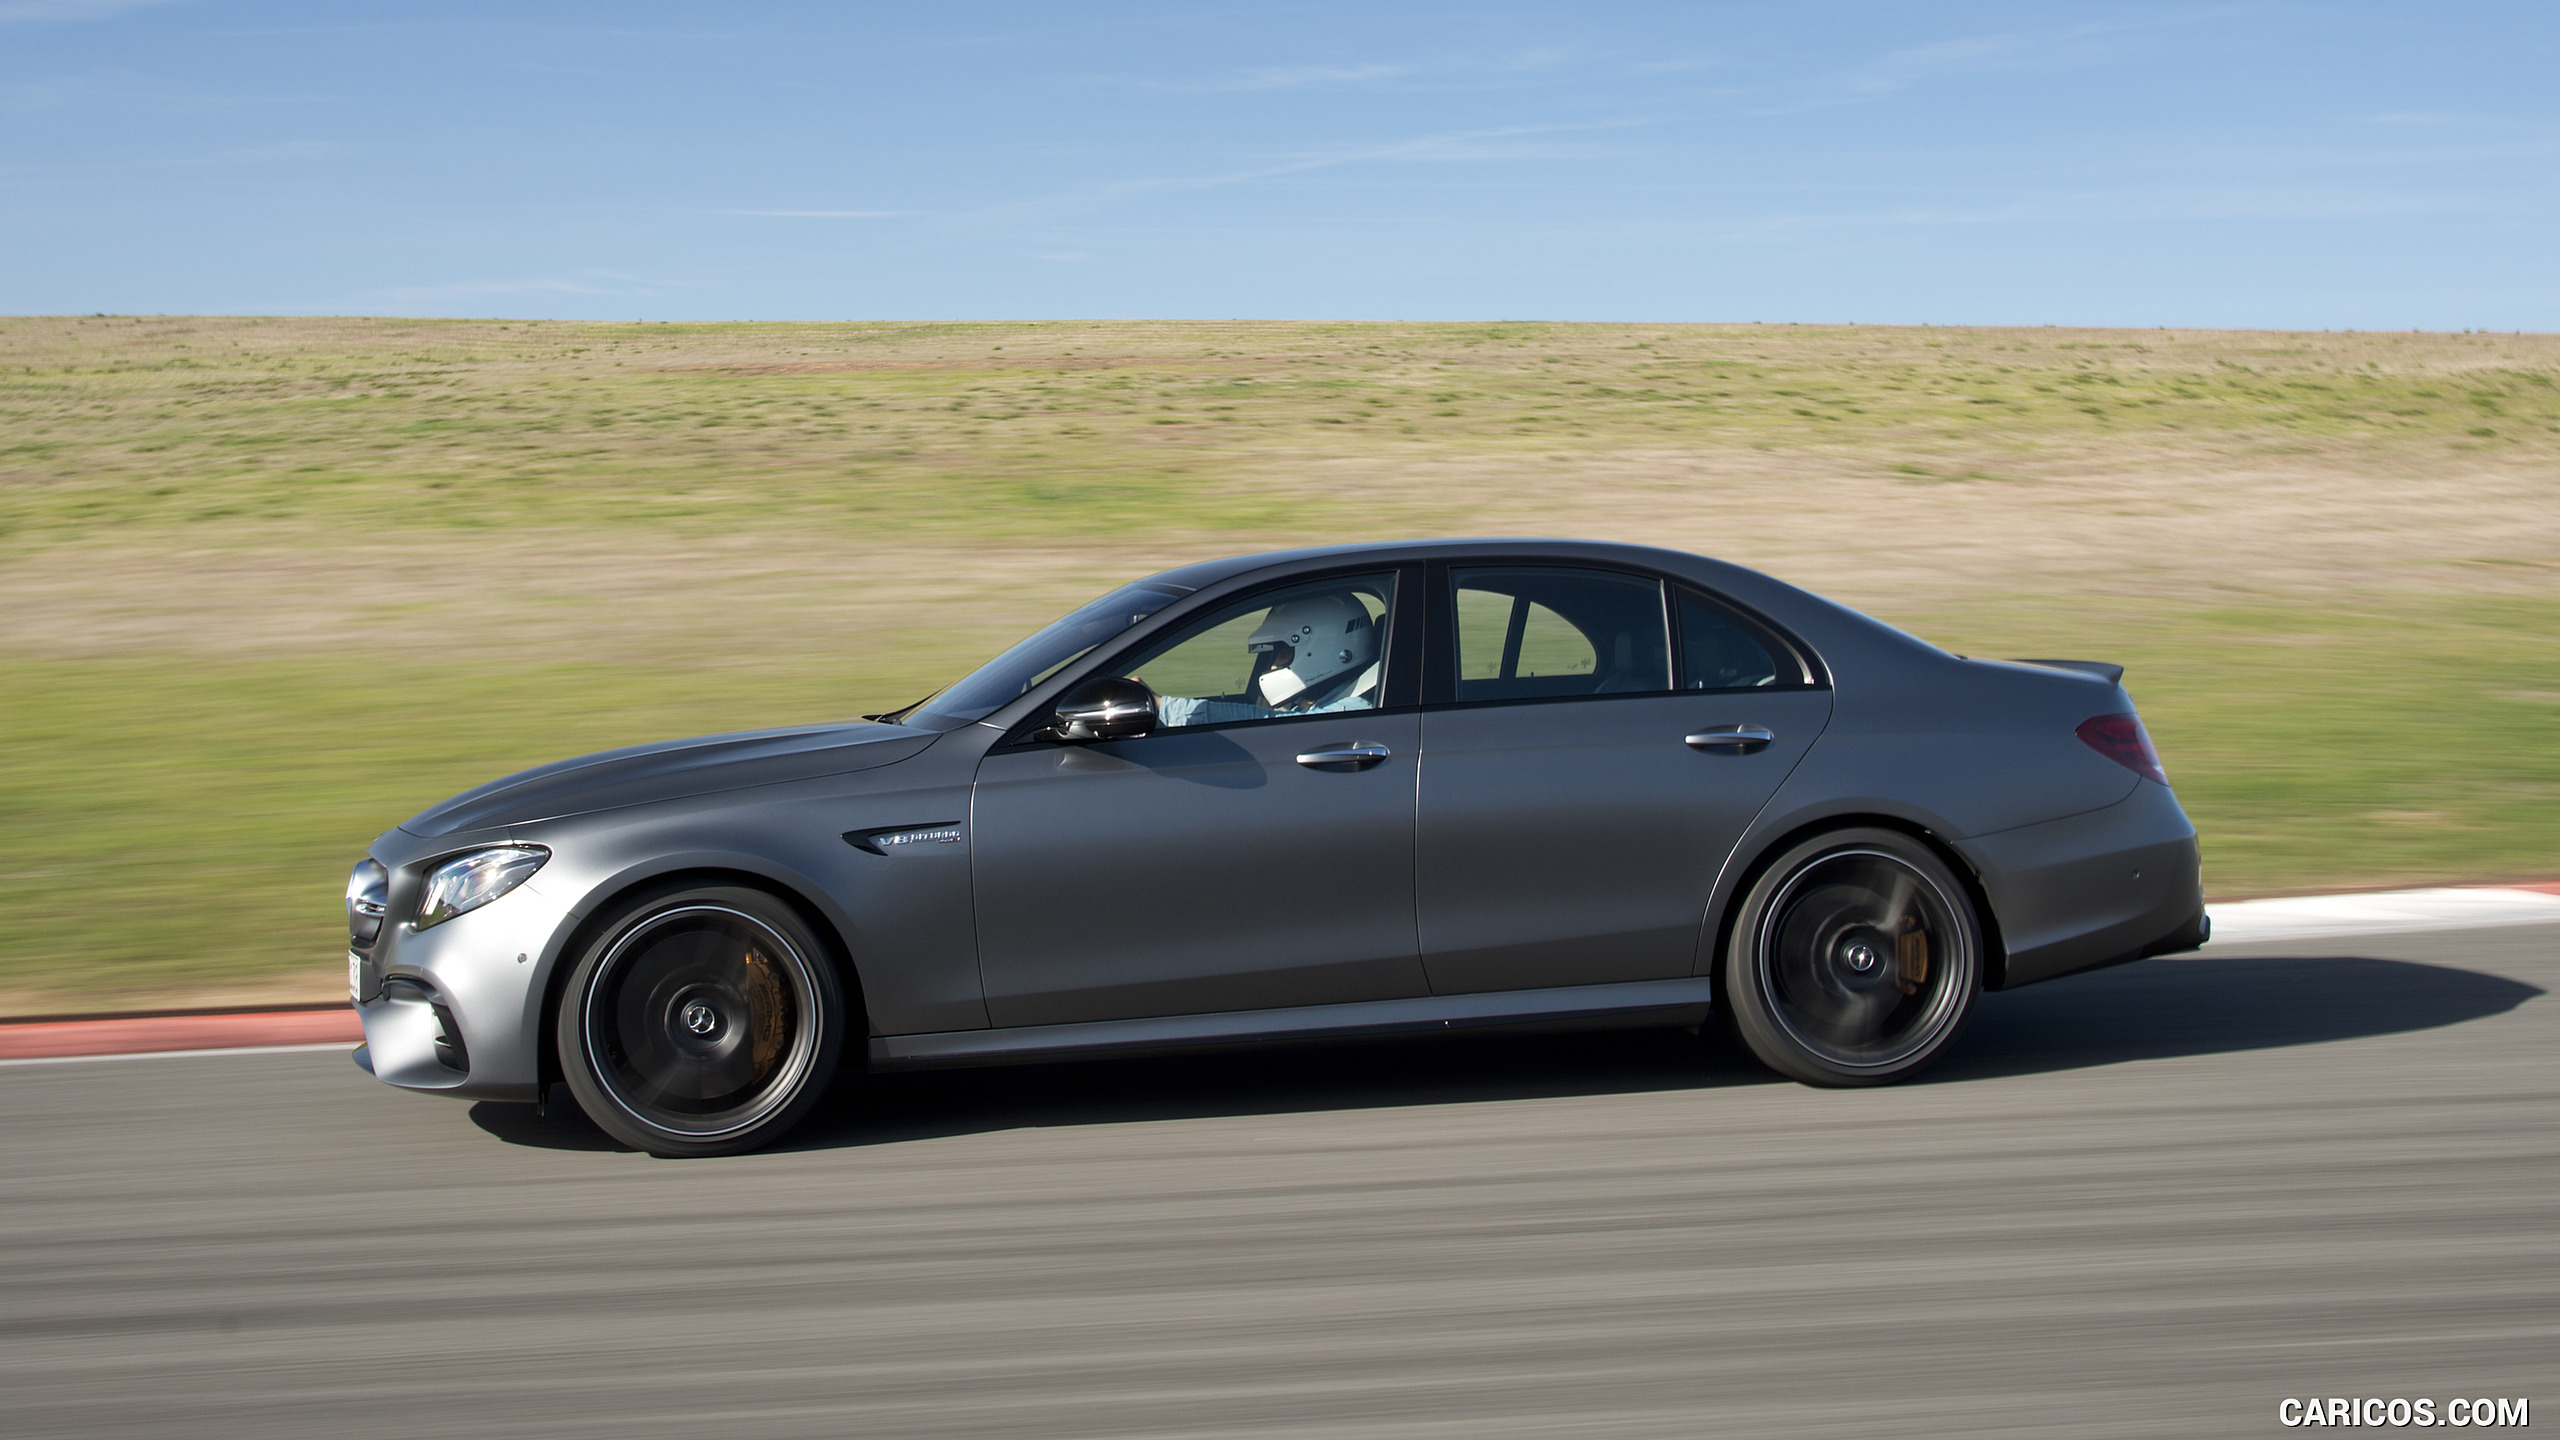 2018 Mercedes-AMG E63 S 4MATIC+ - Side, #267 of 323